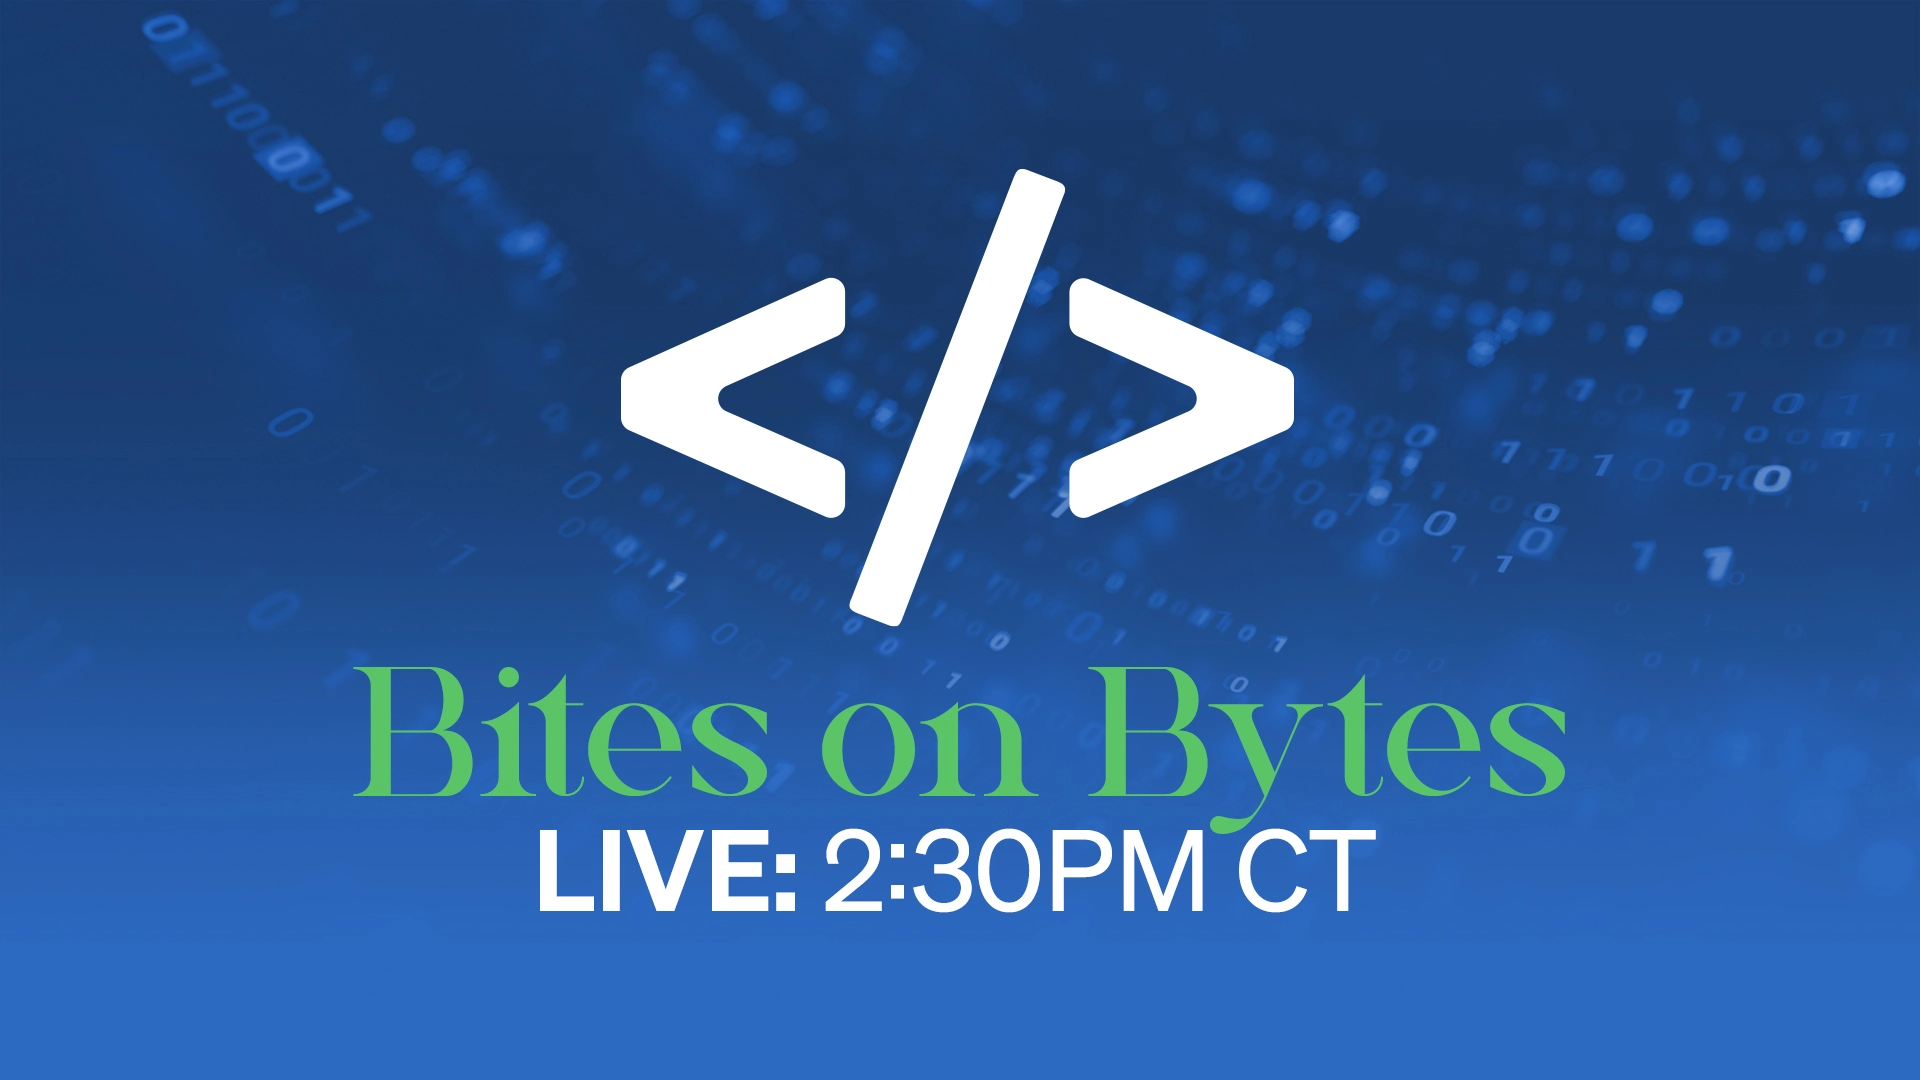 The Bites on Bytes Month in Review